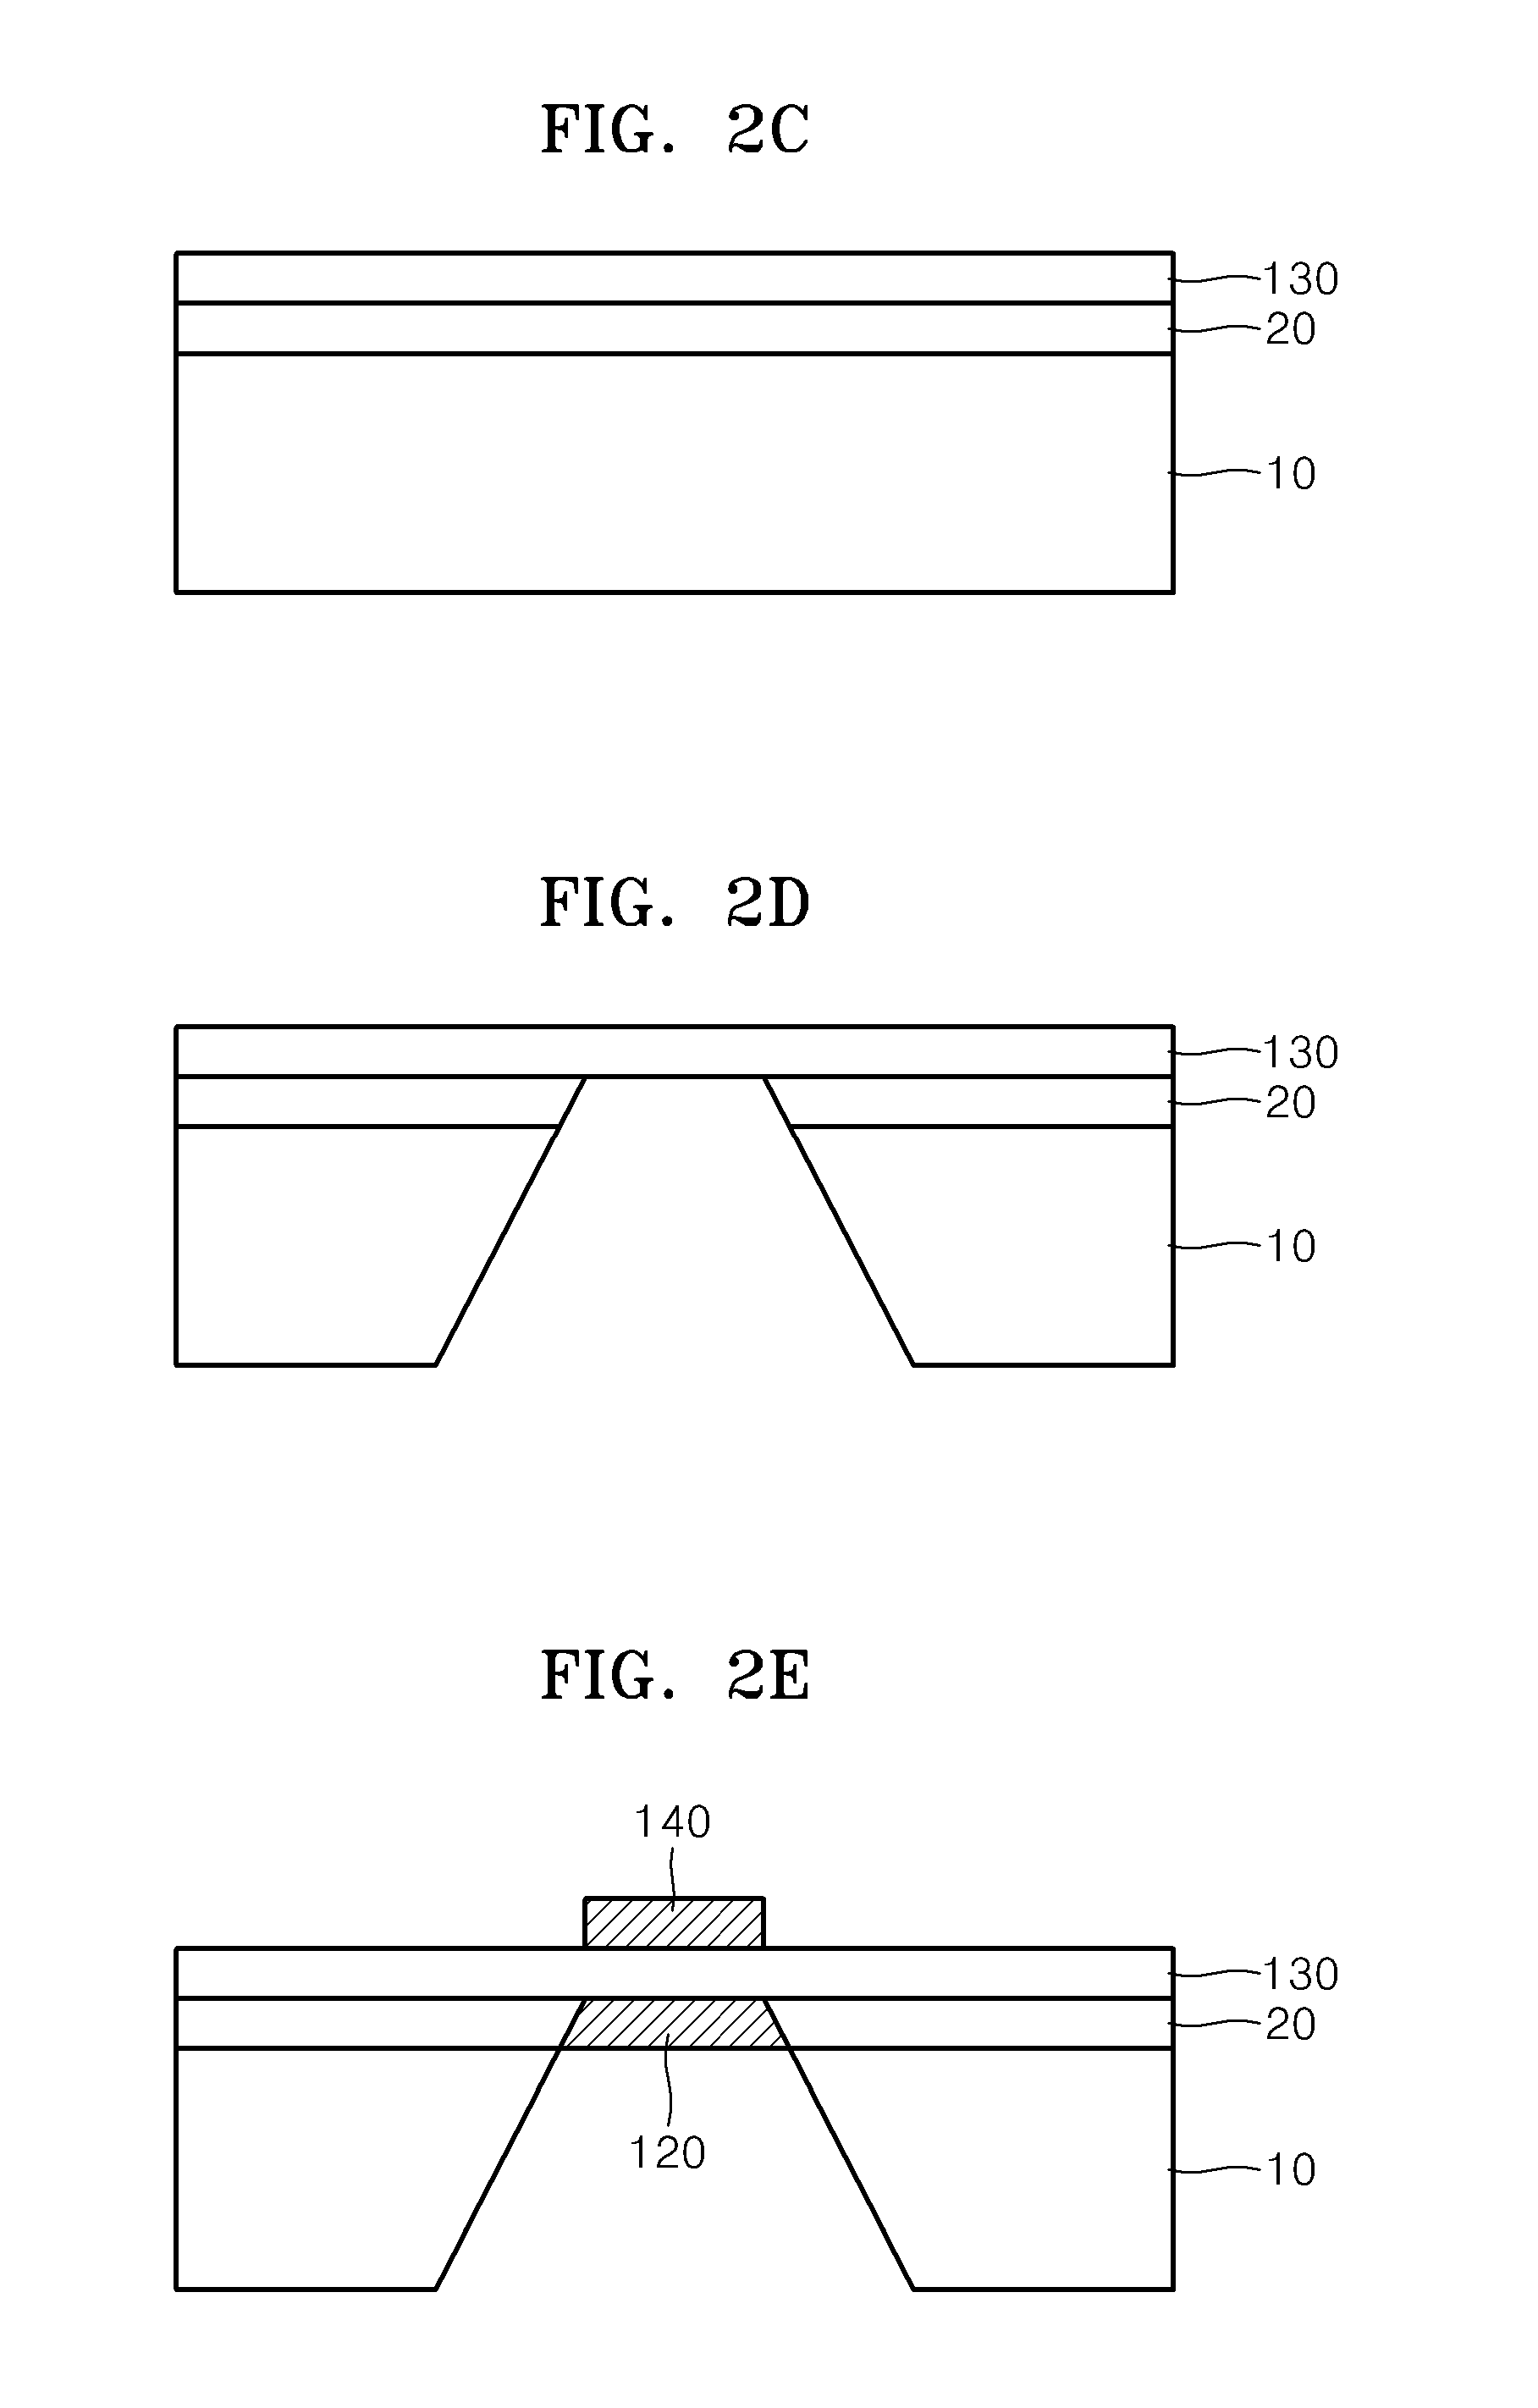 Proton conducting electrolyte membranes having nano-grain YSZ as protective layers, and membrane electrode assemblies and ceramic fuel cells comprising same